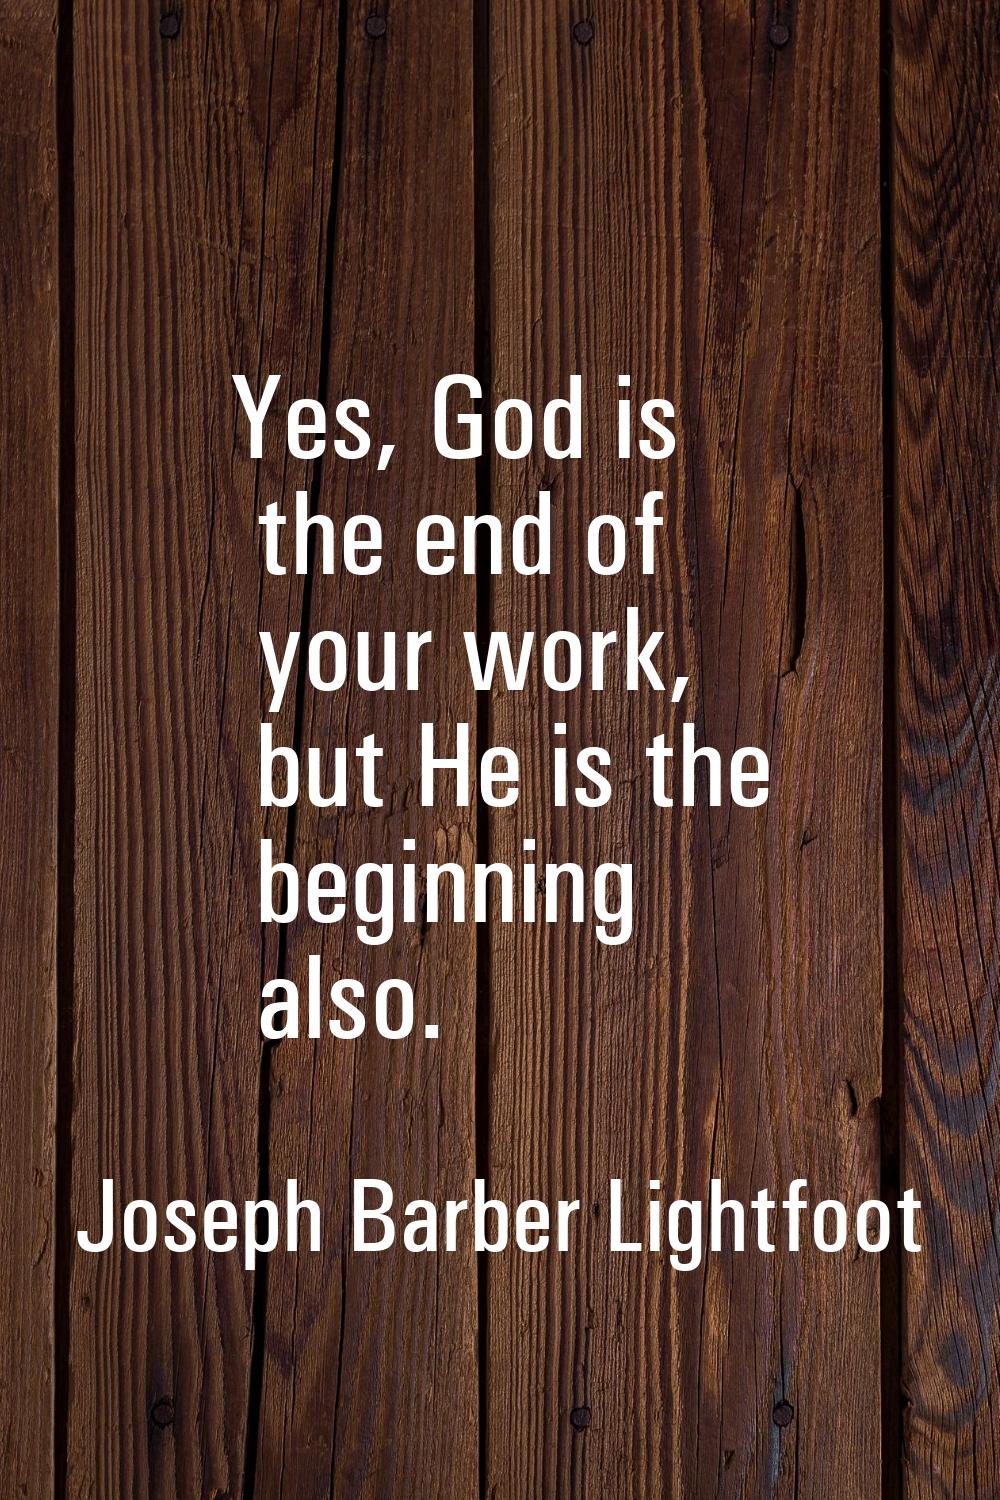 Yes, God is the end of your work, but He is the beginning also.